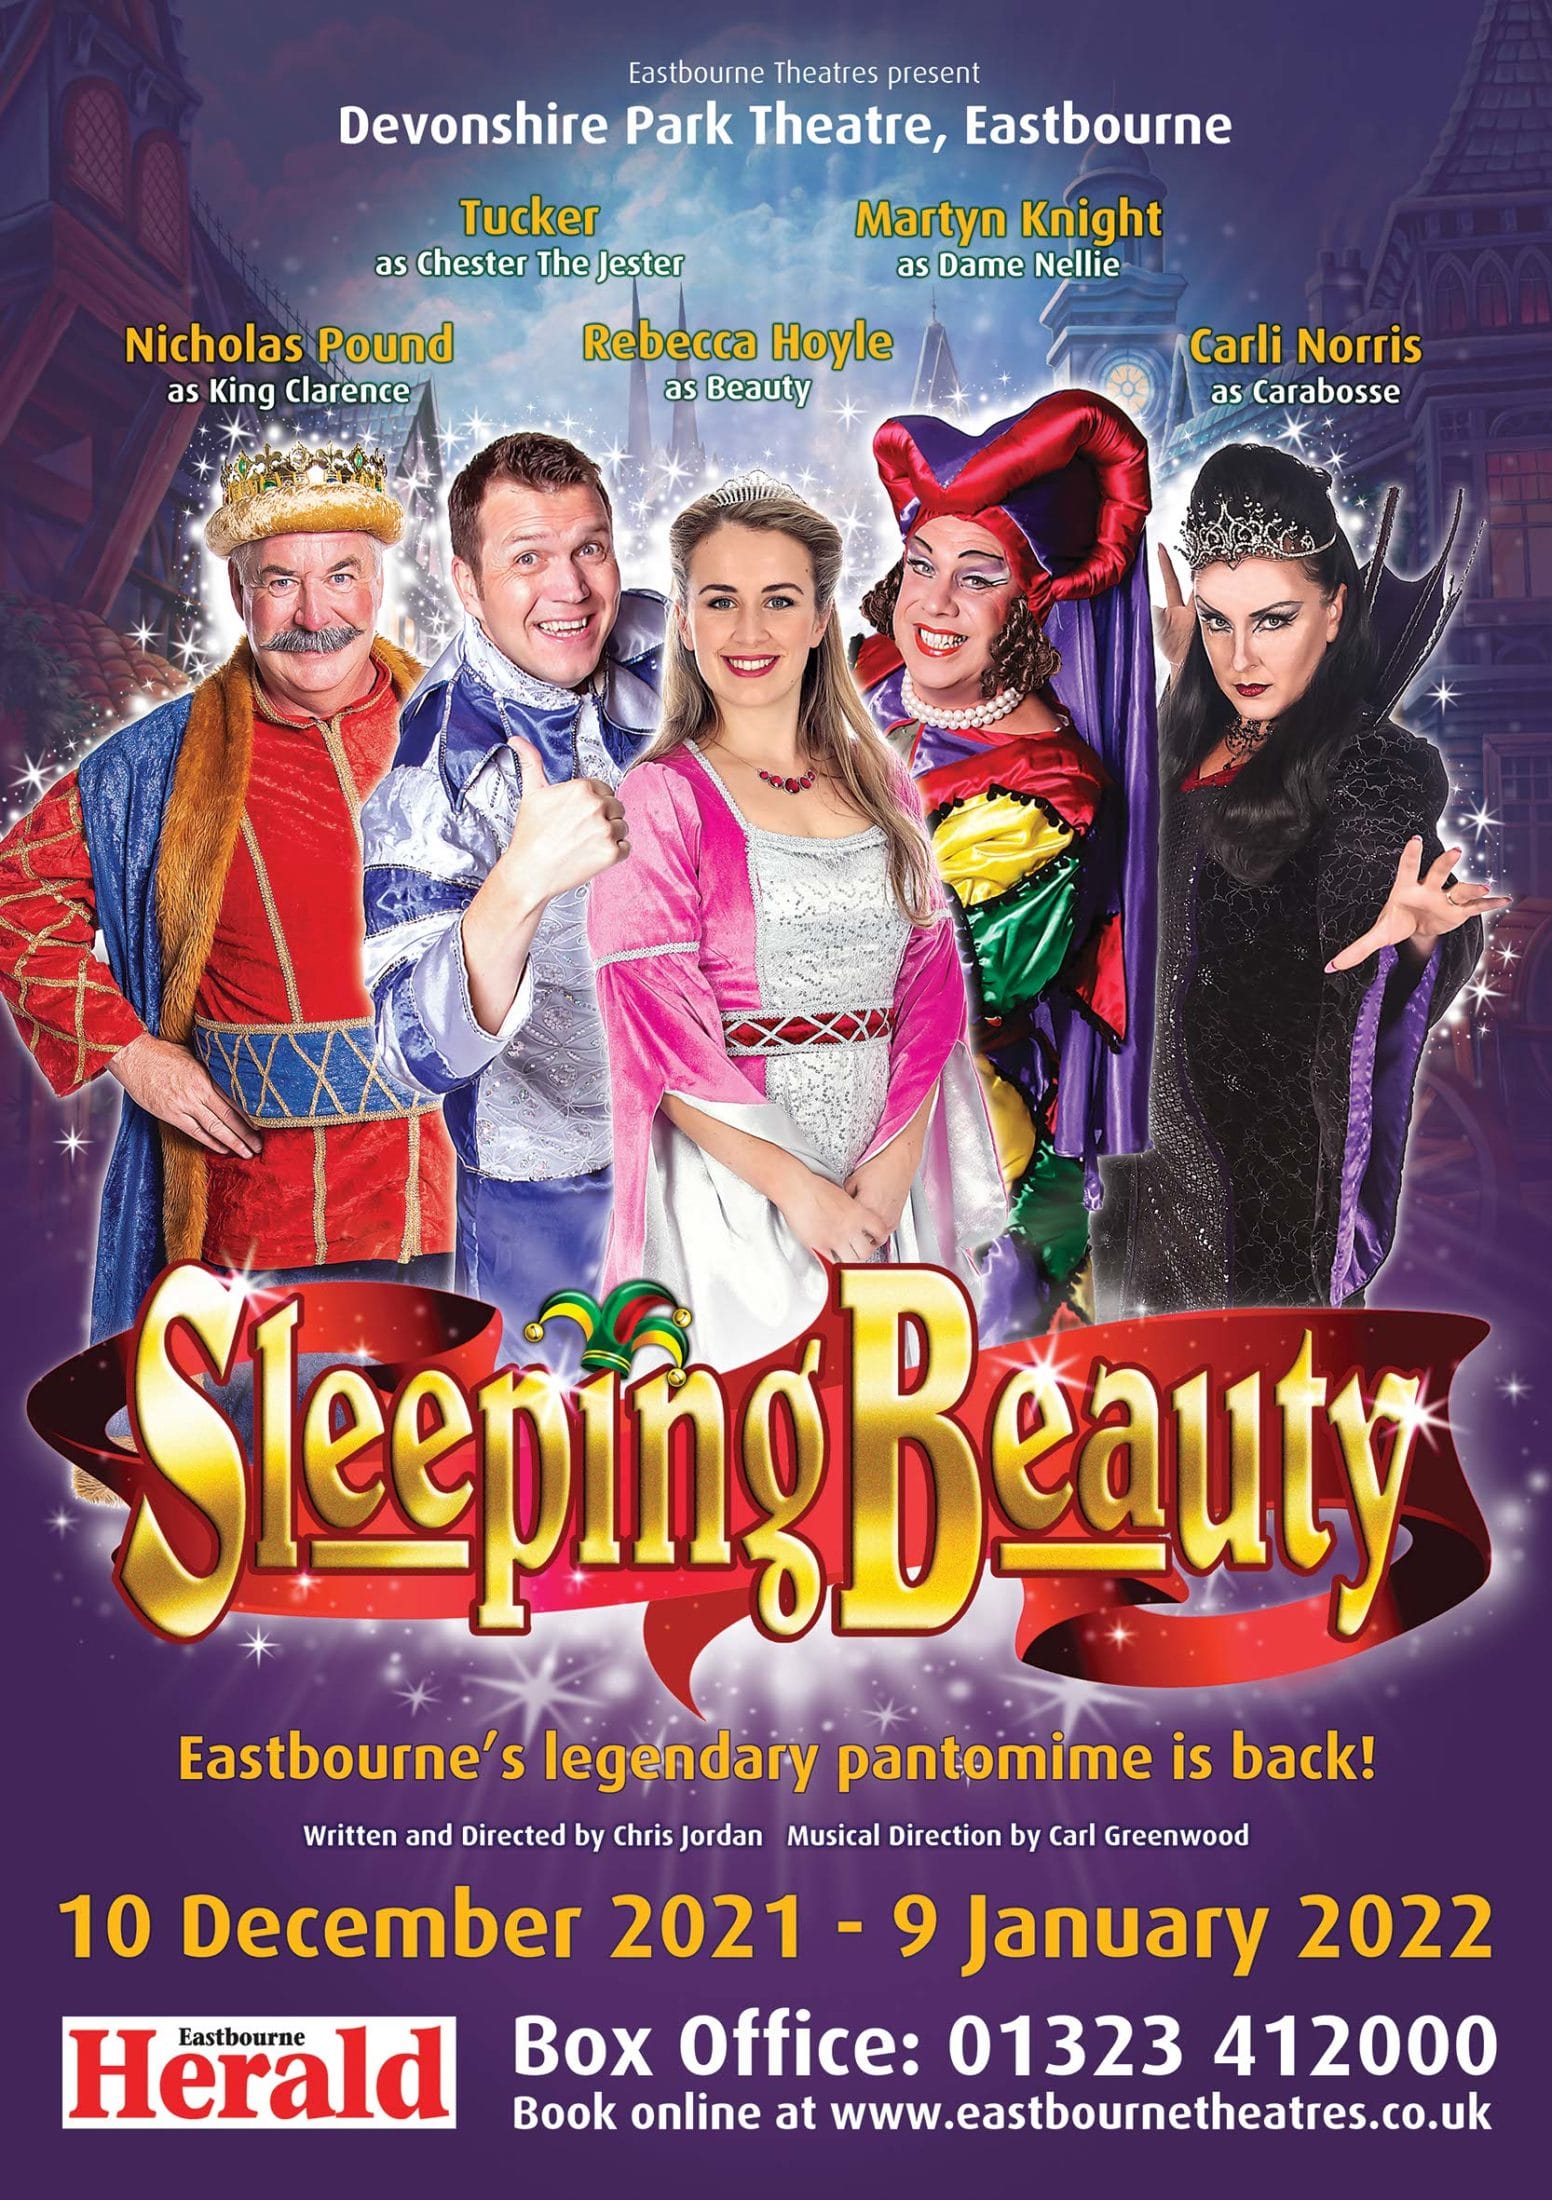 Mia Longman and Megan O'Hara performing in 'Sleeping Beauty' at Devonshire Park Theatre (Eastbourne)